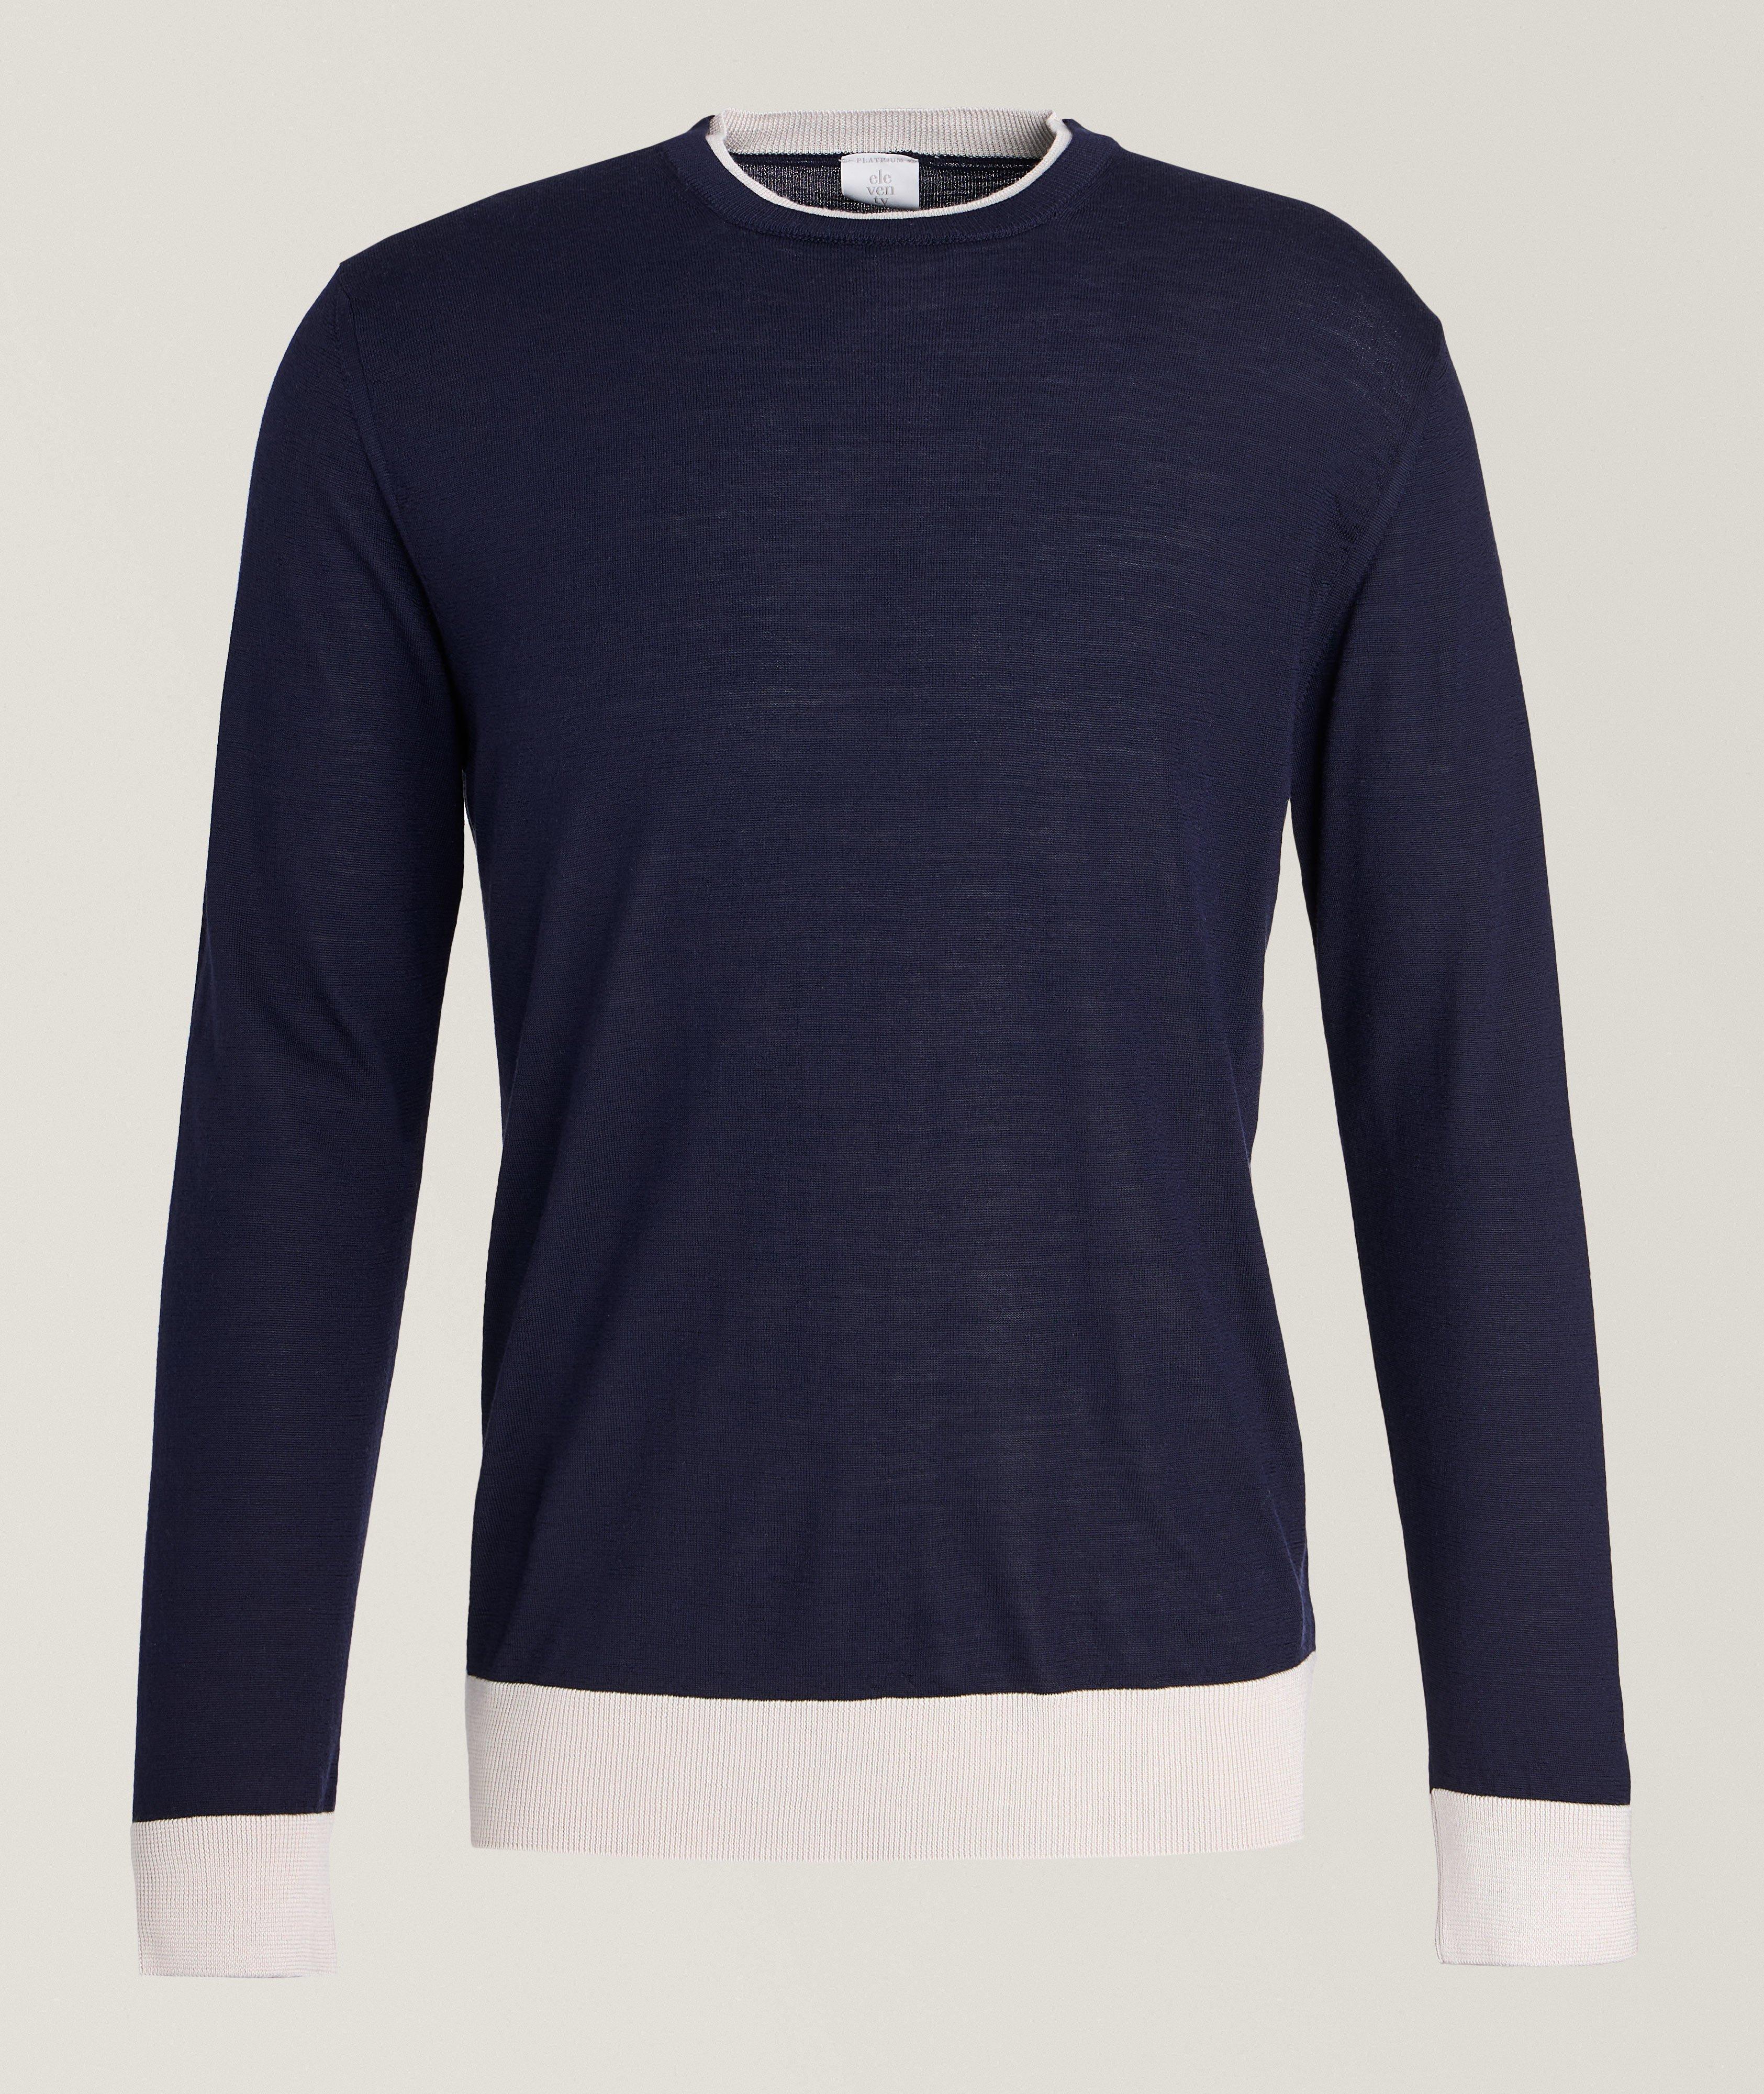 Contrast Tipped Wool-Silk Sweater image 0